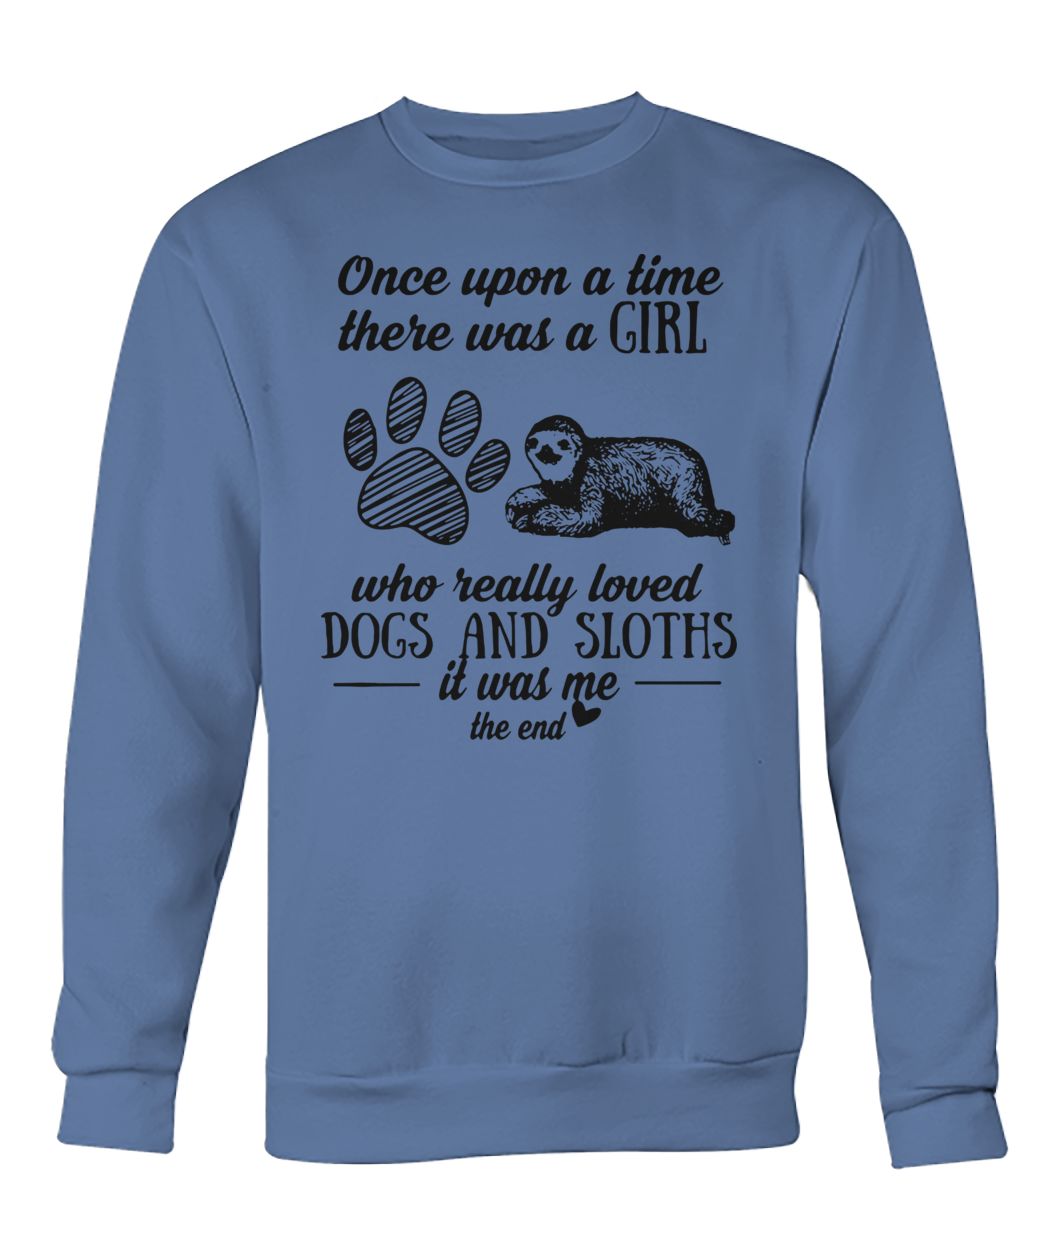 Once upon a time there was a girl who really loved dogs and sloths it was me crew neck sweatshirt